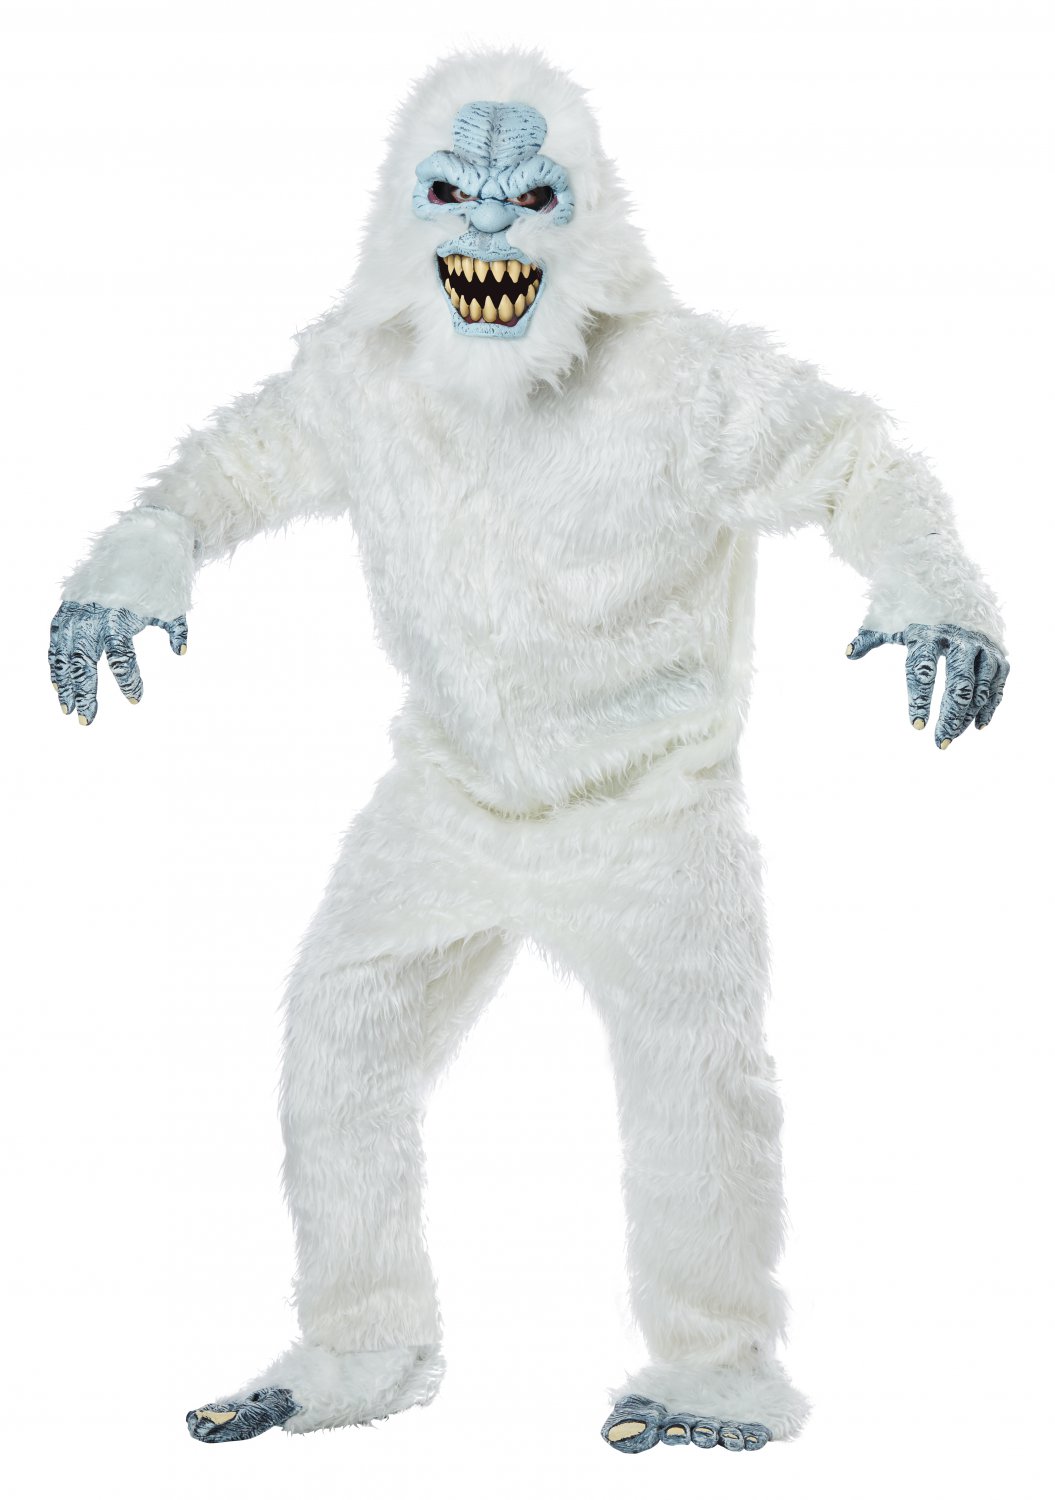 One Standard Size # 01243 Abominable Snowman Yeti Snow Beast Adult Costume